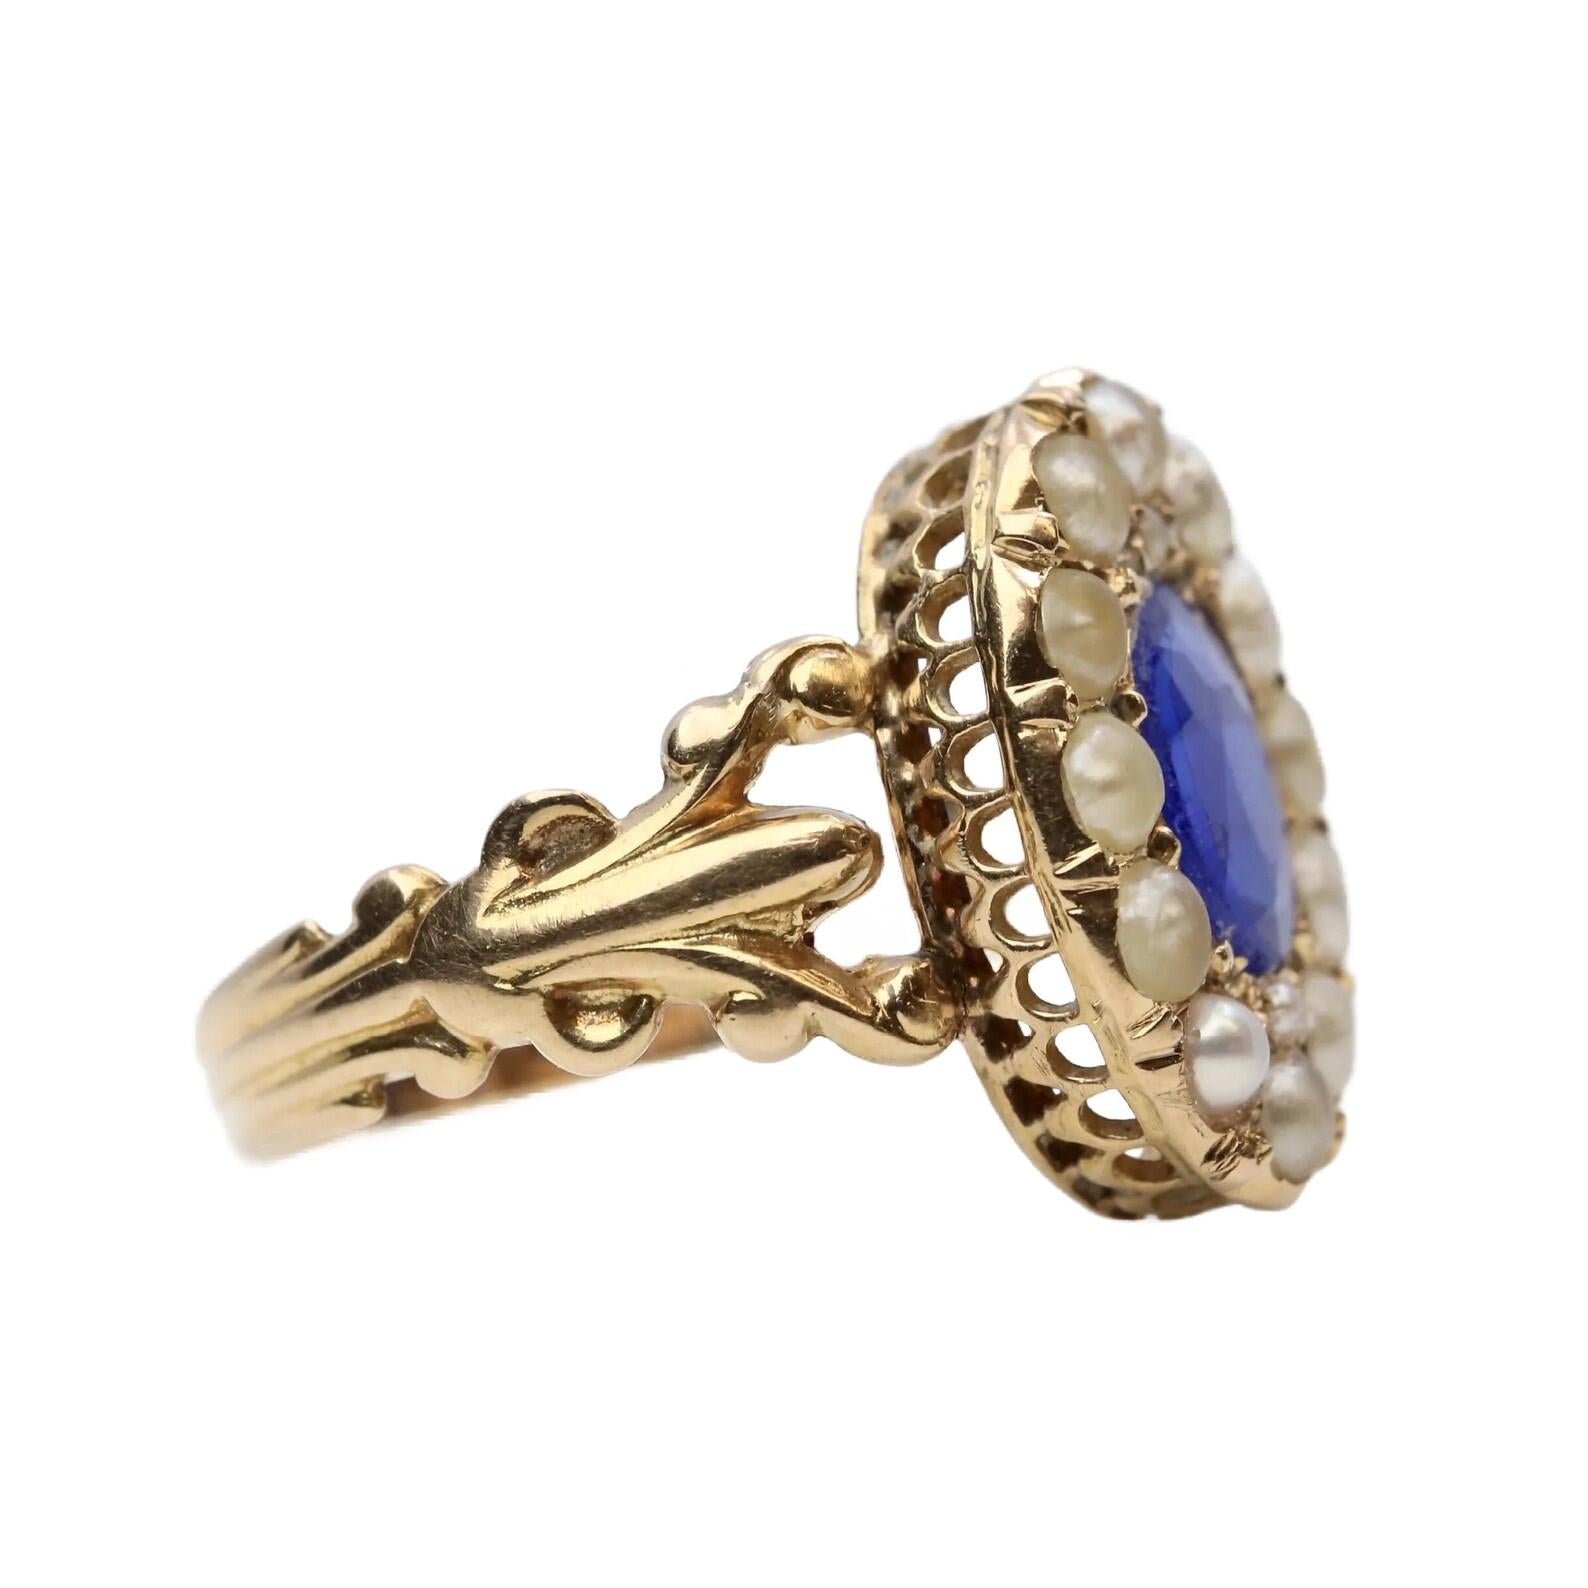 A handmade original victorian period Kyanite, and natural pearl ring in 14 karat yellow gold. Centered by a 1.20 carat rich velvety blue oval cut Kyanite and encircled by fourteen natural half pearls.

In excellent condition, this ring is a size 6